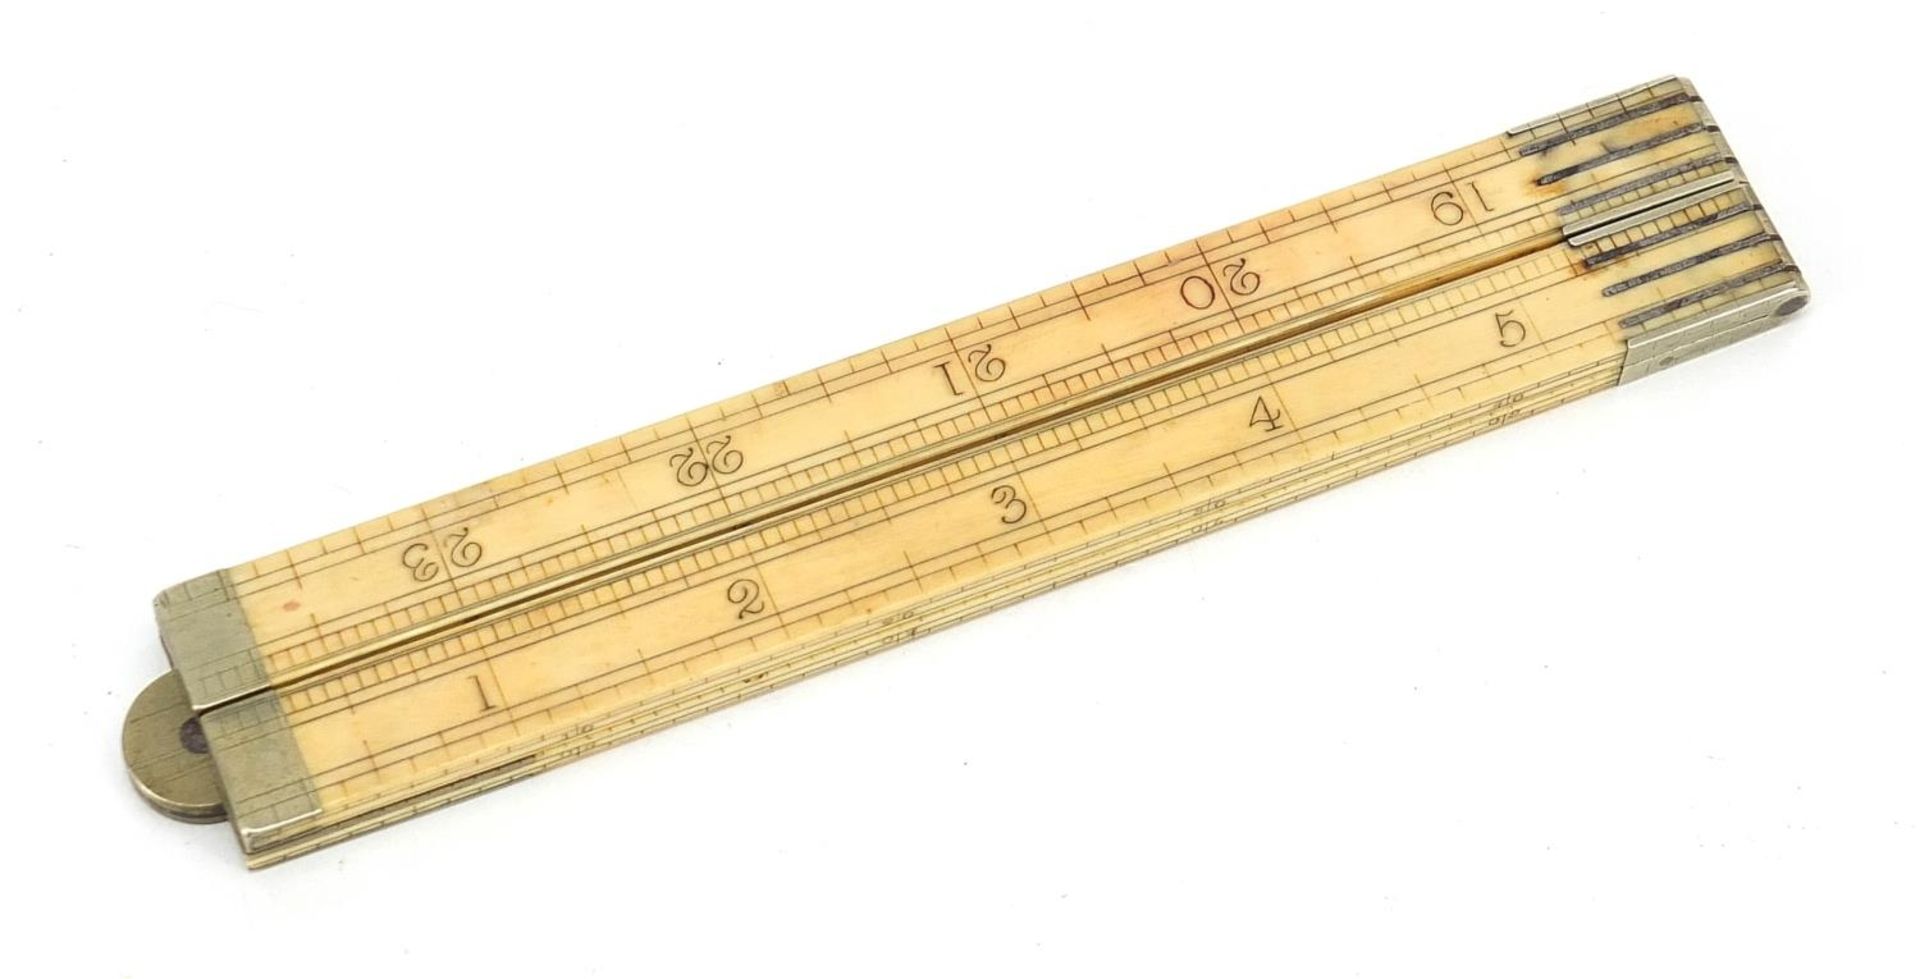 19th century ivory folding rule by W H Archer of Goodge St London, 16cm in length when closed